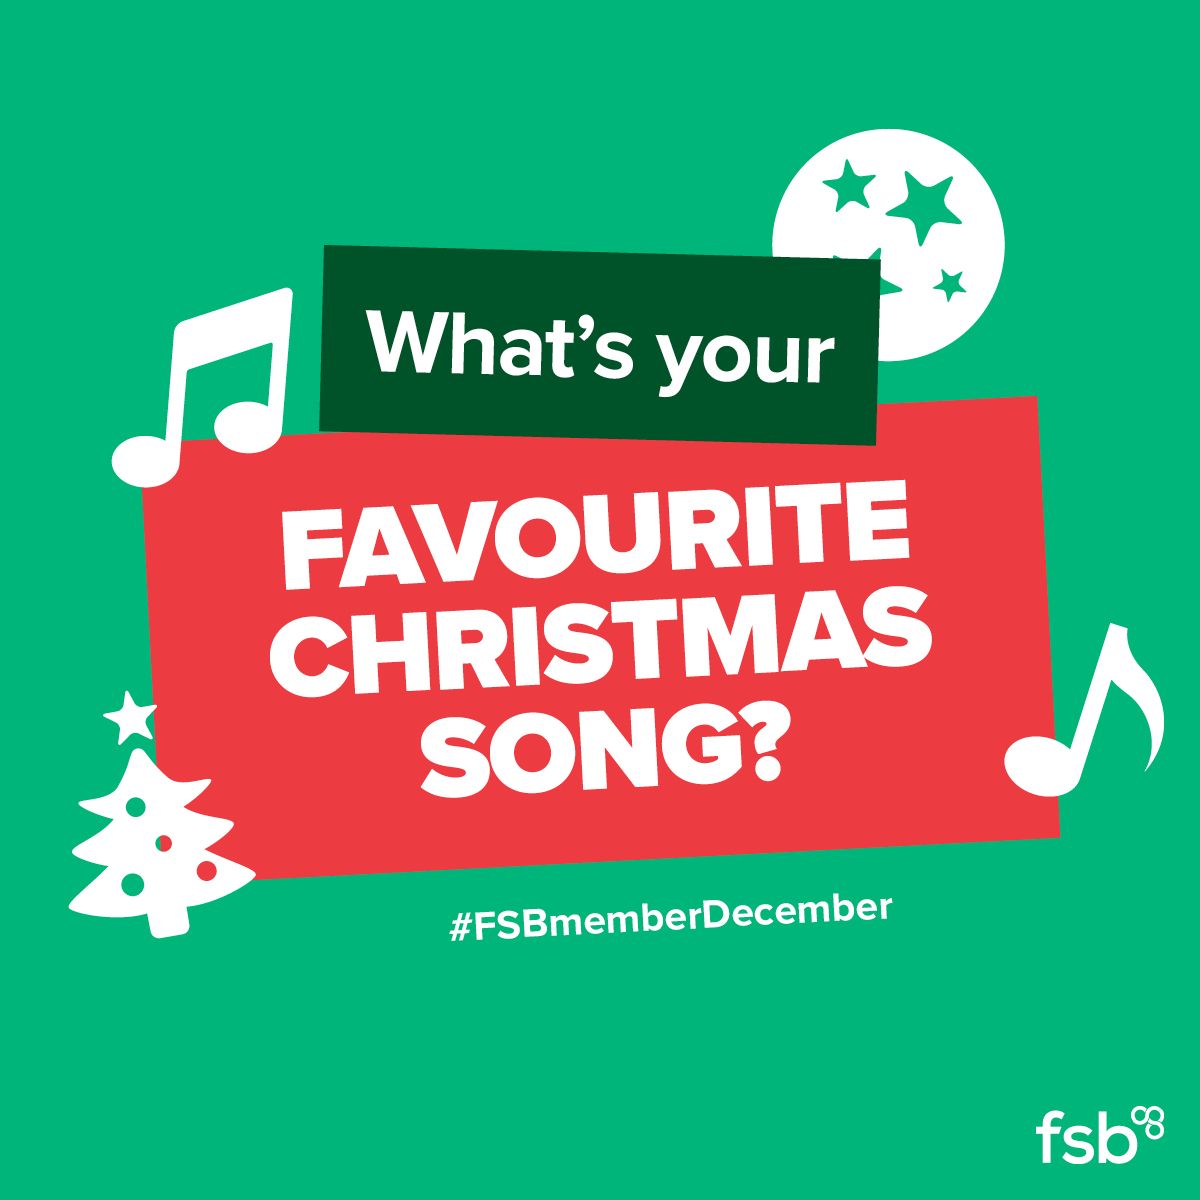 The Christmas countdown is on! For your chance to win one of our fabulous FSB Festive Gift Boxes, tell us your favourite Christmas song. 🎄 #FSBmemberDecember